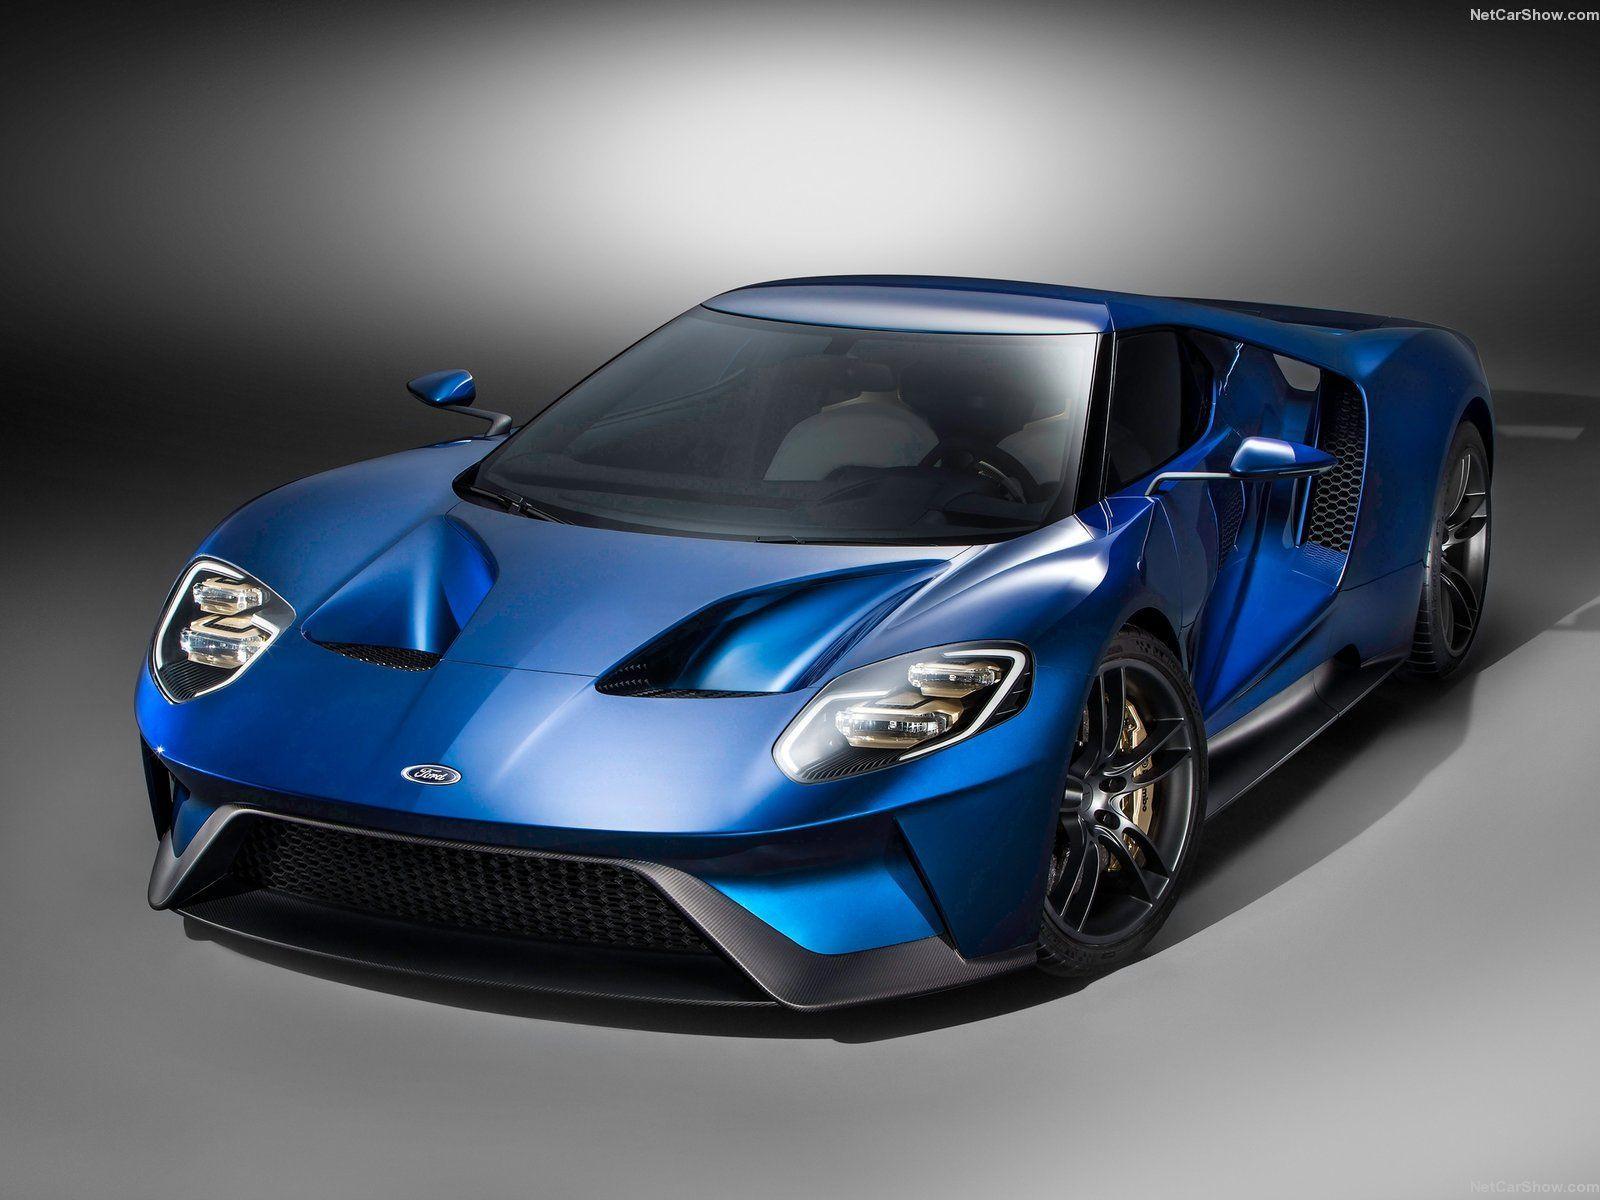 Ford GT photo with 102 pics. CarsBase.com